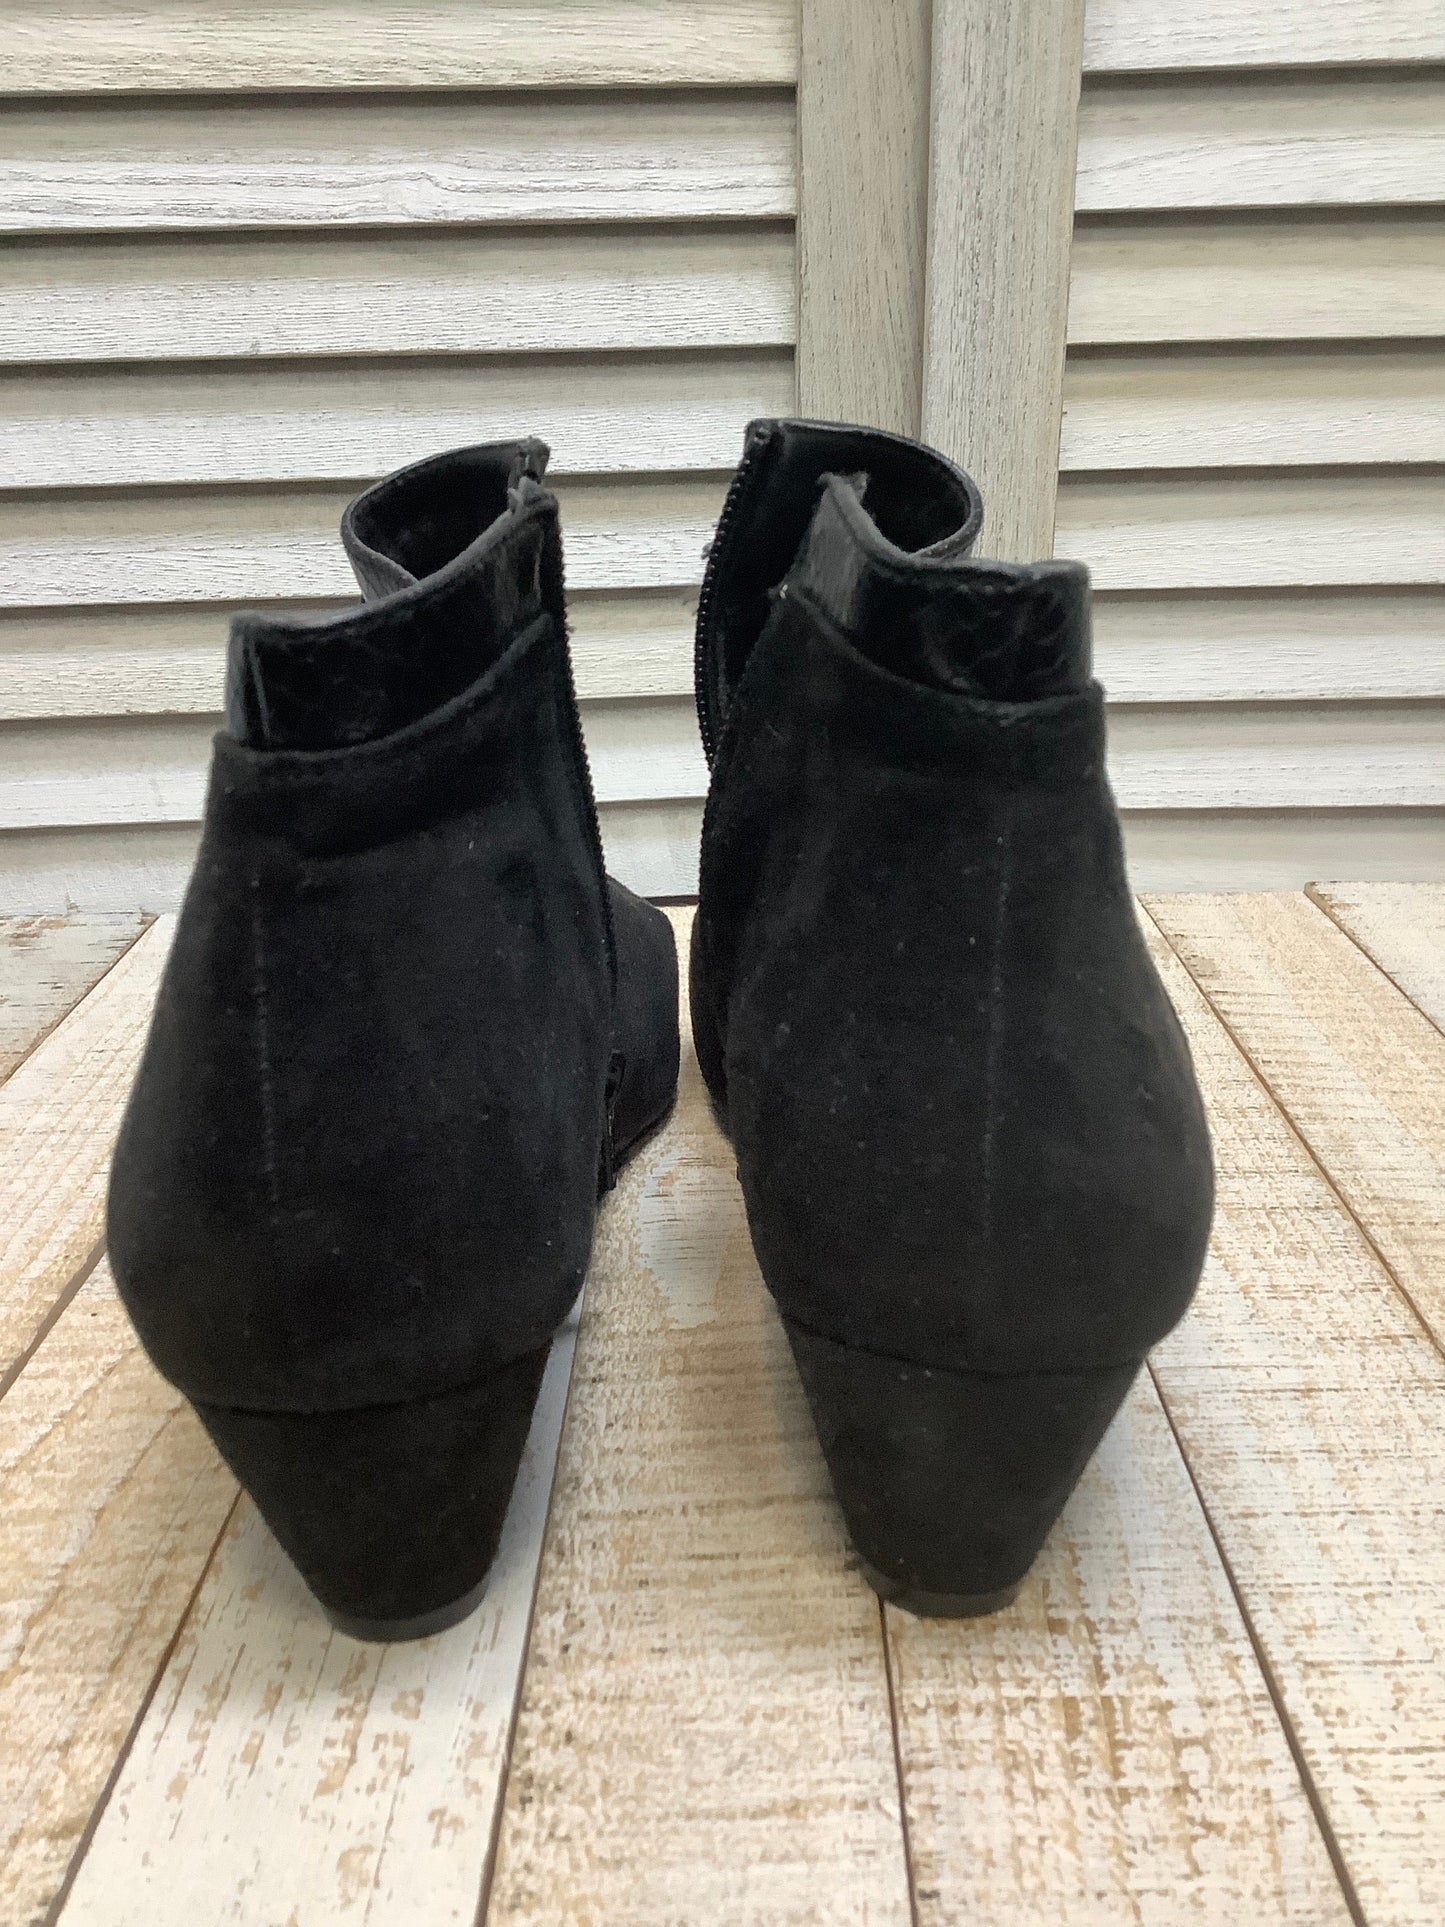 Black Boots Ankle Heels Croft And Barrow, Size 7